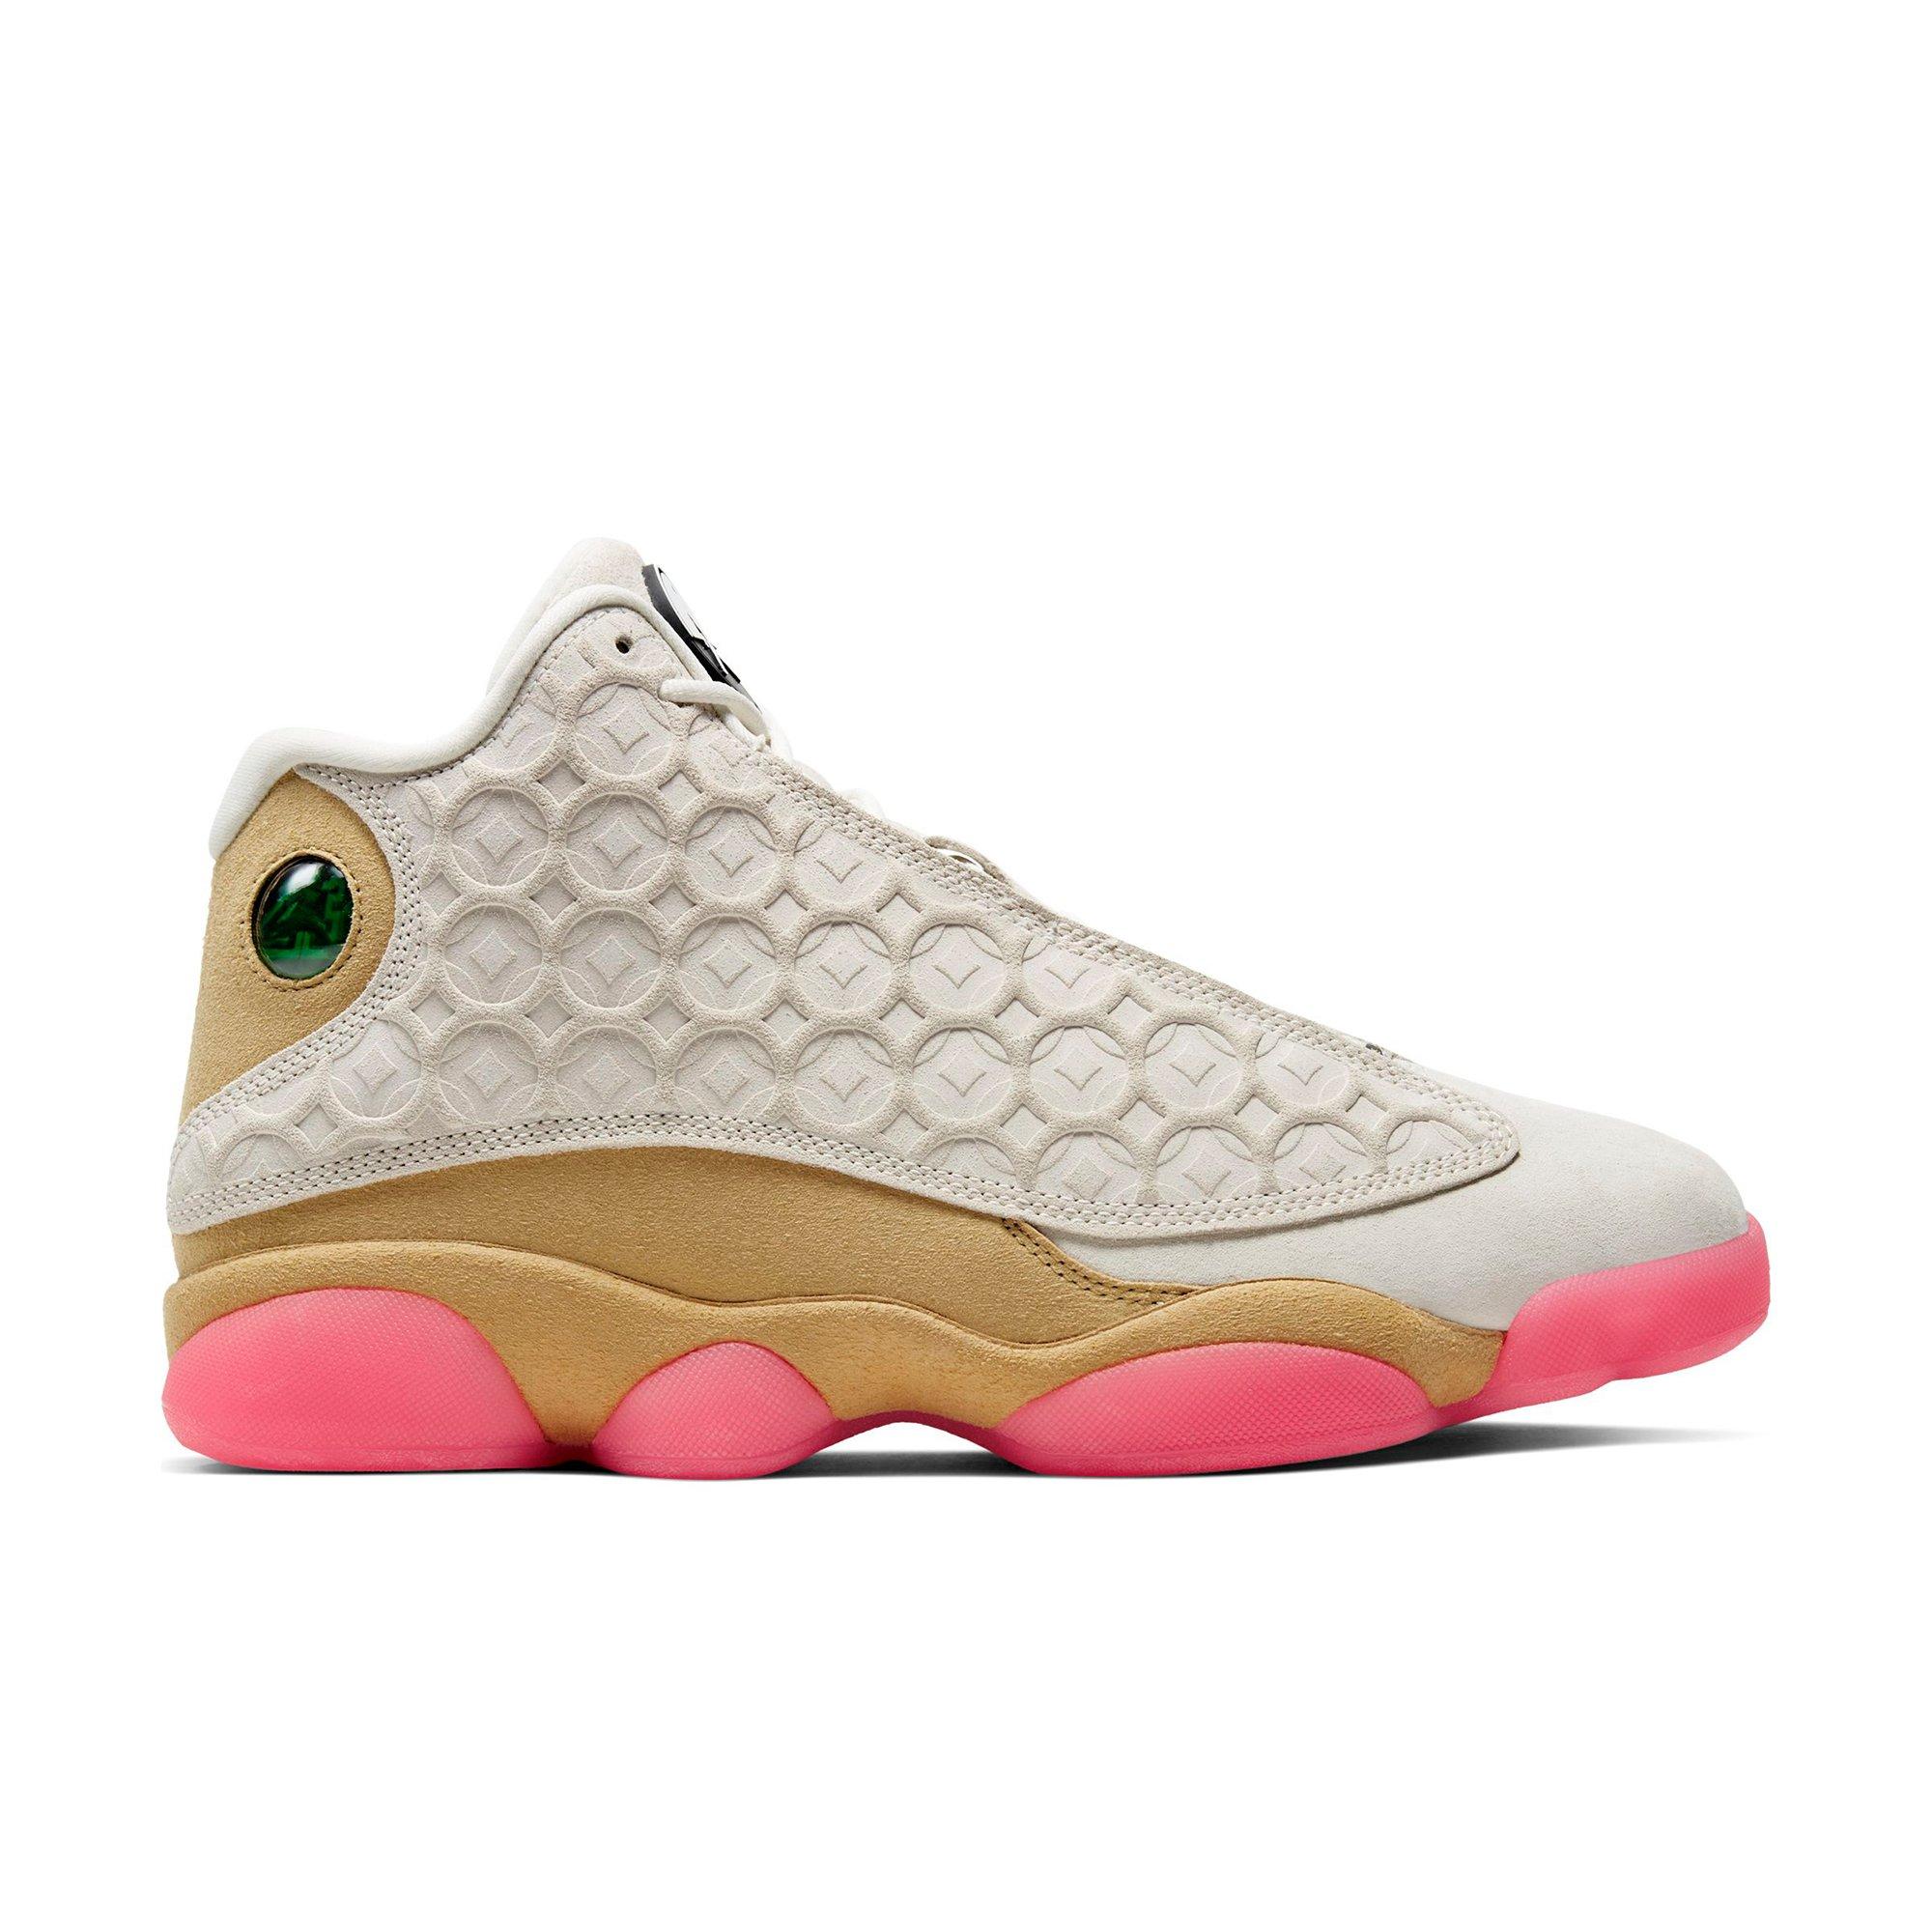 jordan 13 retro chinese new year outfit